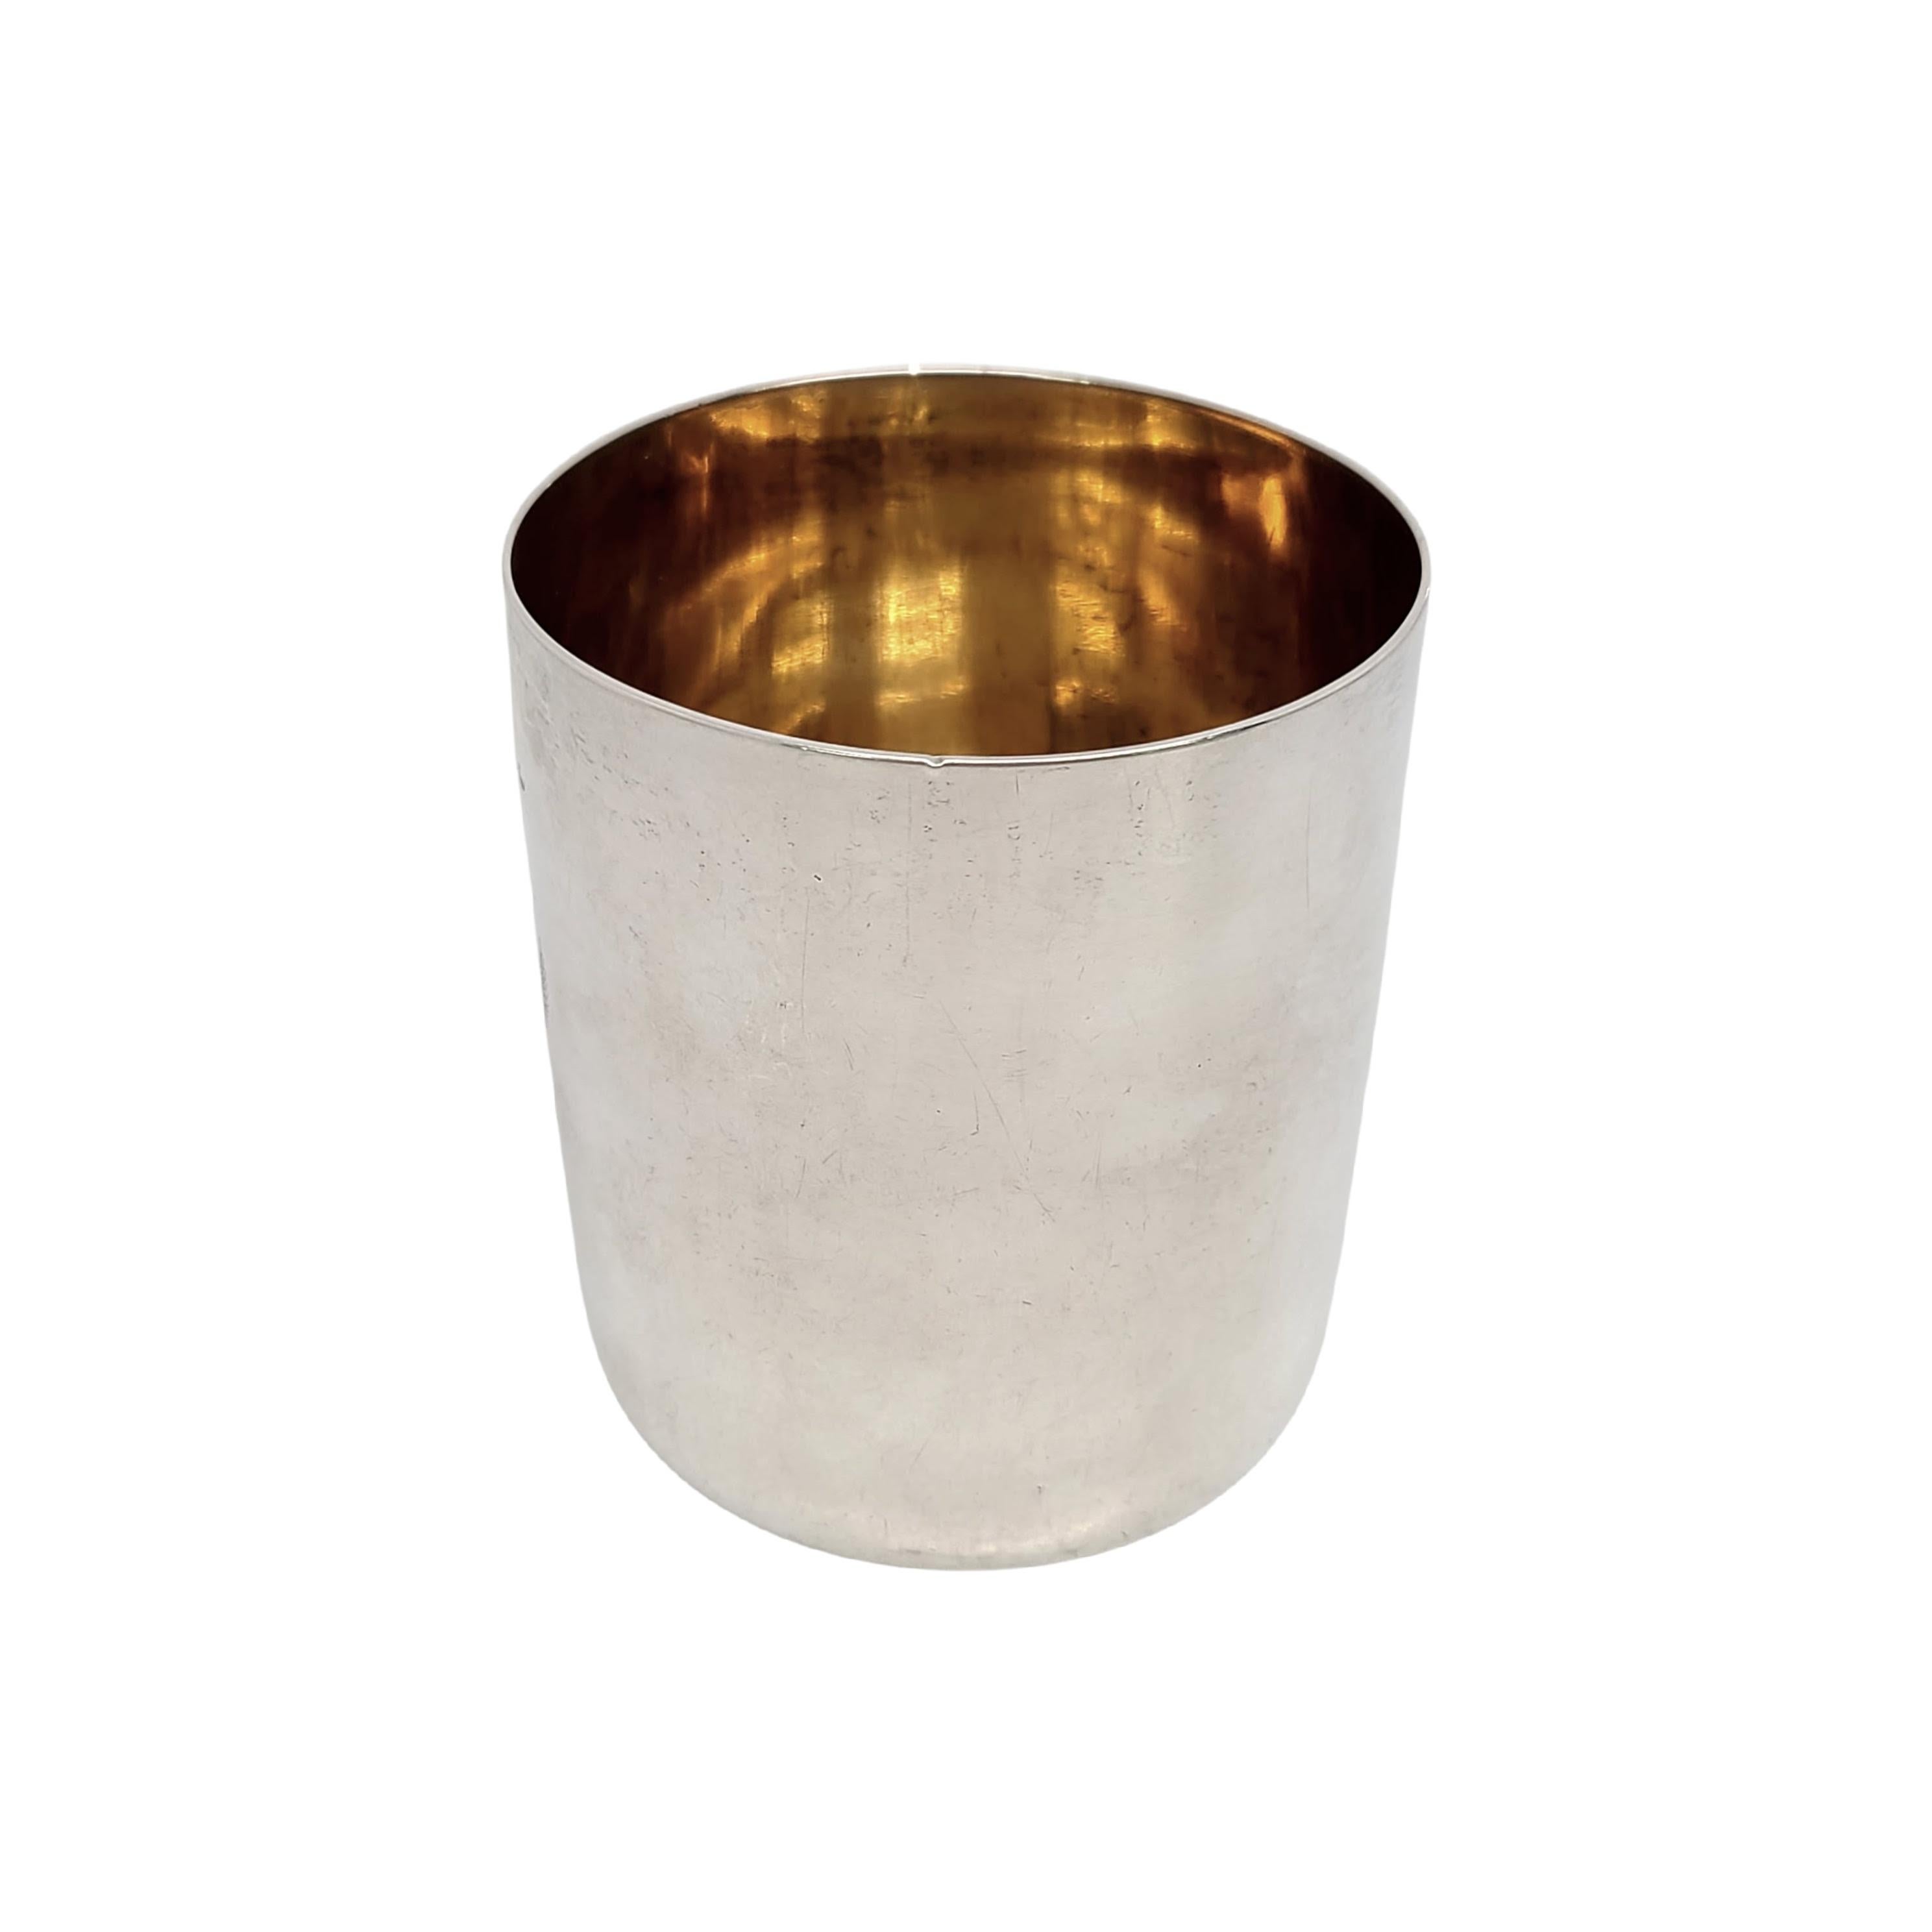 Sterling silver tumbler cup from London, England, circa 1809.

No monogram or engraving.

This simple and elegant tumbler features a highly polished finish and gold wash interior. Engraved with a crowned horse holding a sword sitting atop a crown 